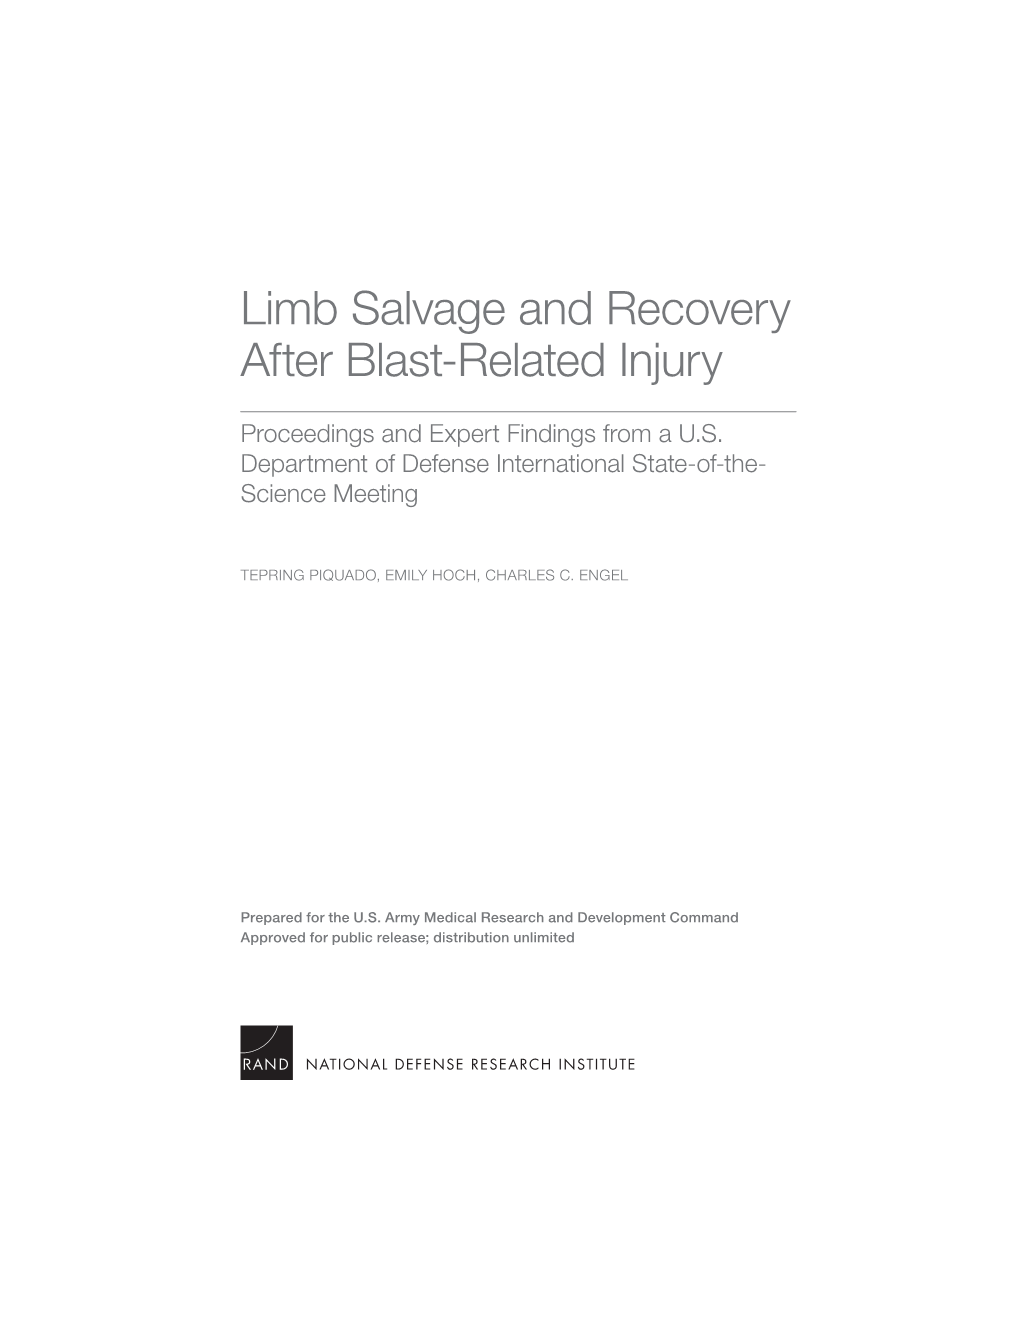 Limb Salvage and Recovery After Blast-Related Injury